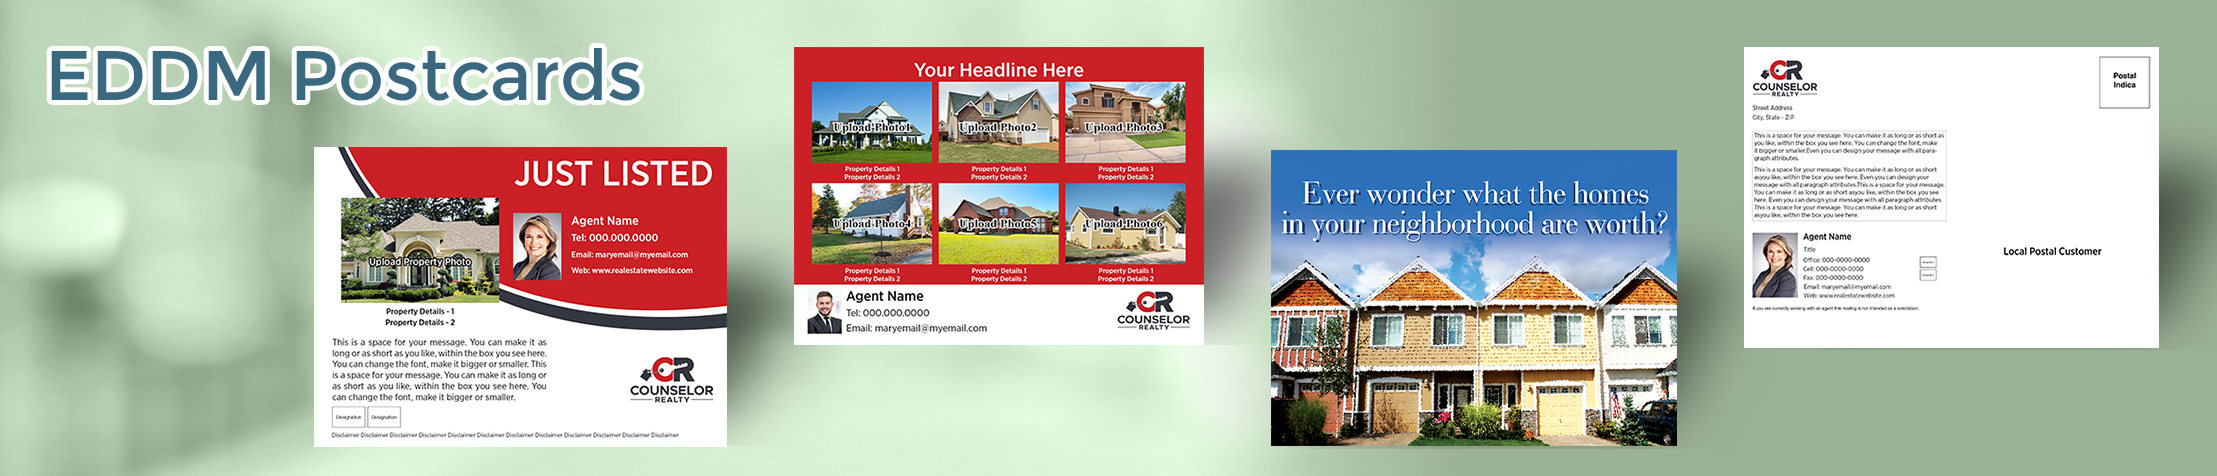 Counselor Realty Real Estate EDDM Postcards - personalized Every Door Direct Mail Postcards | BestPrintBuy.com